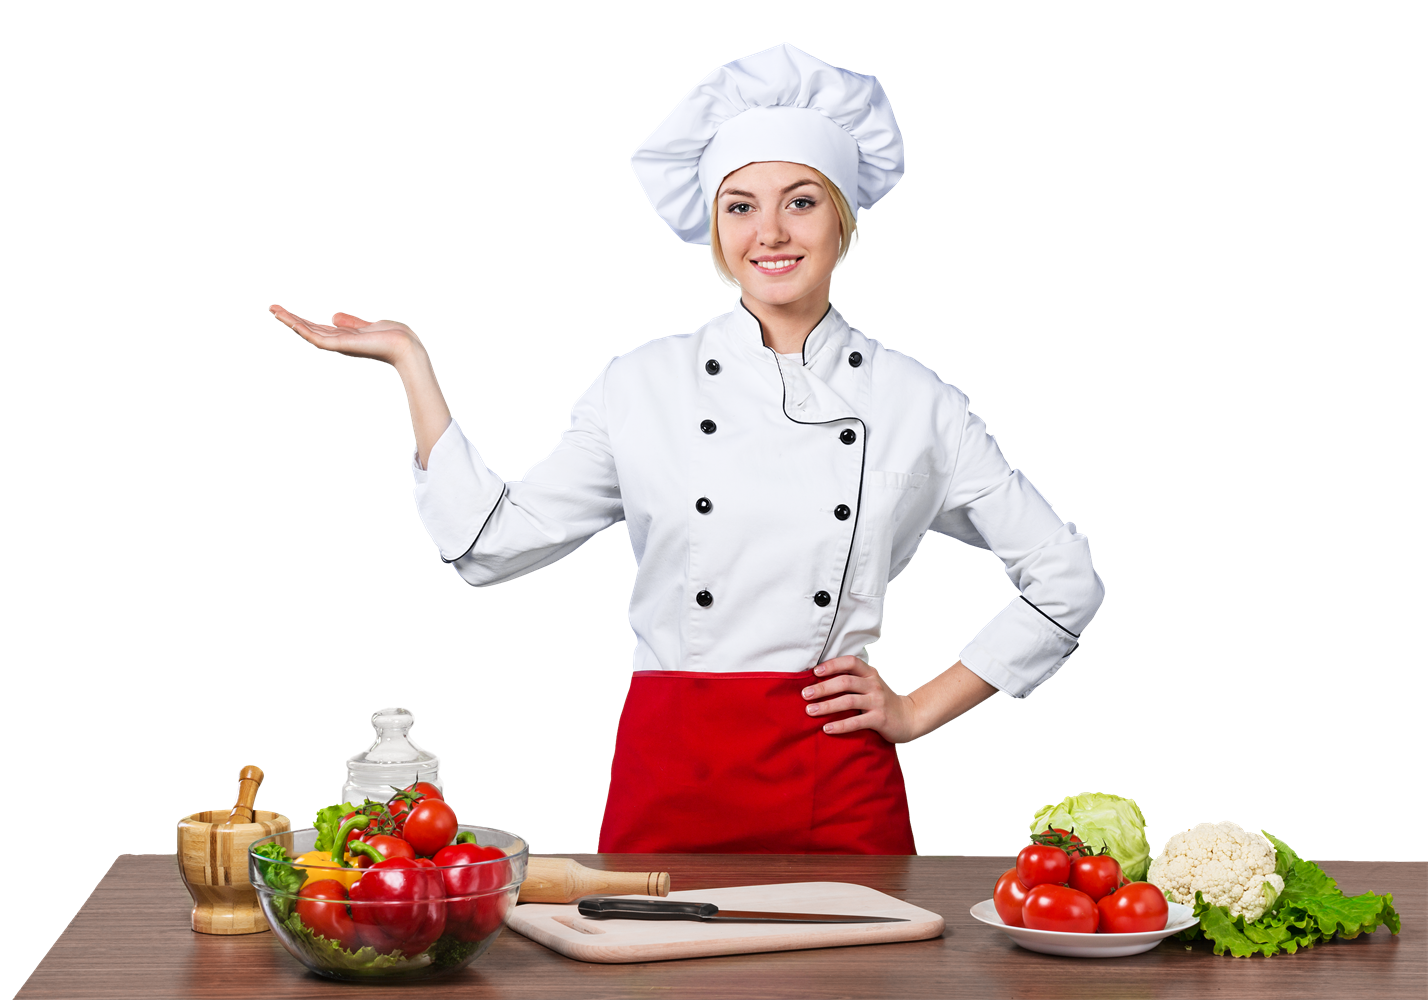 cook clipart lady chef